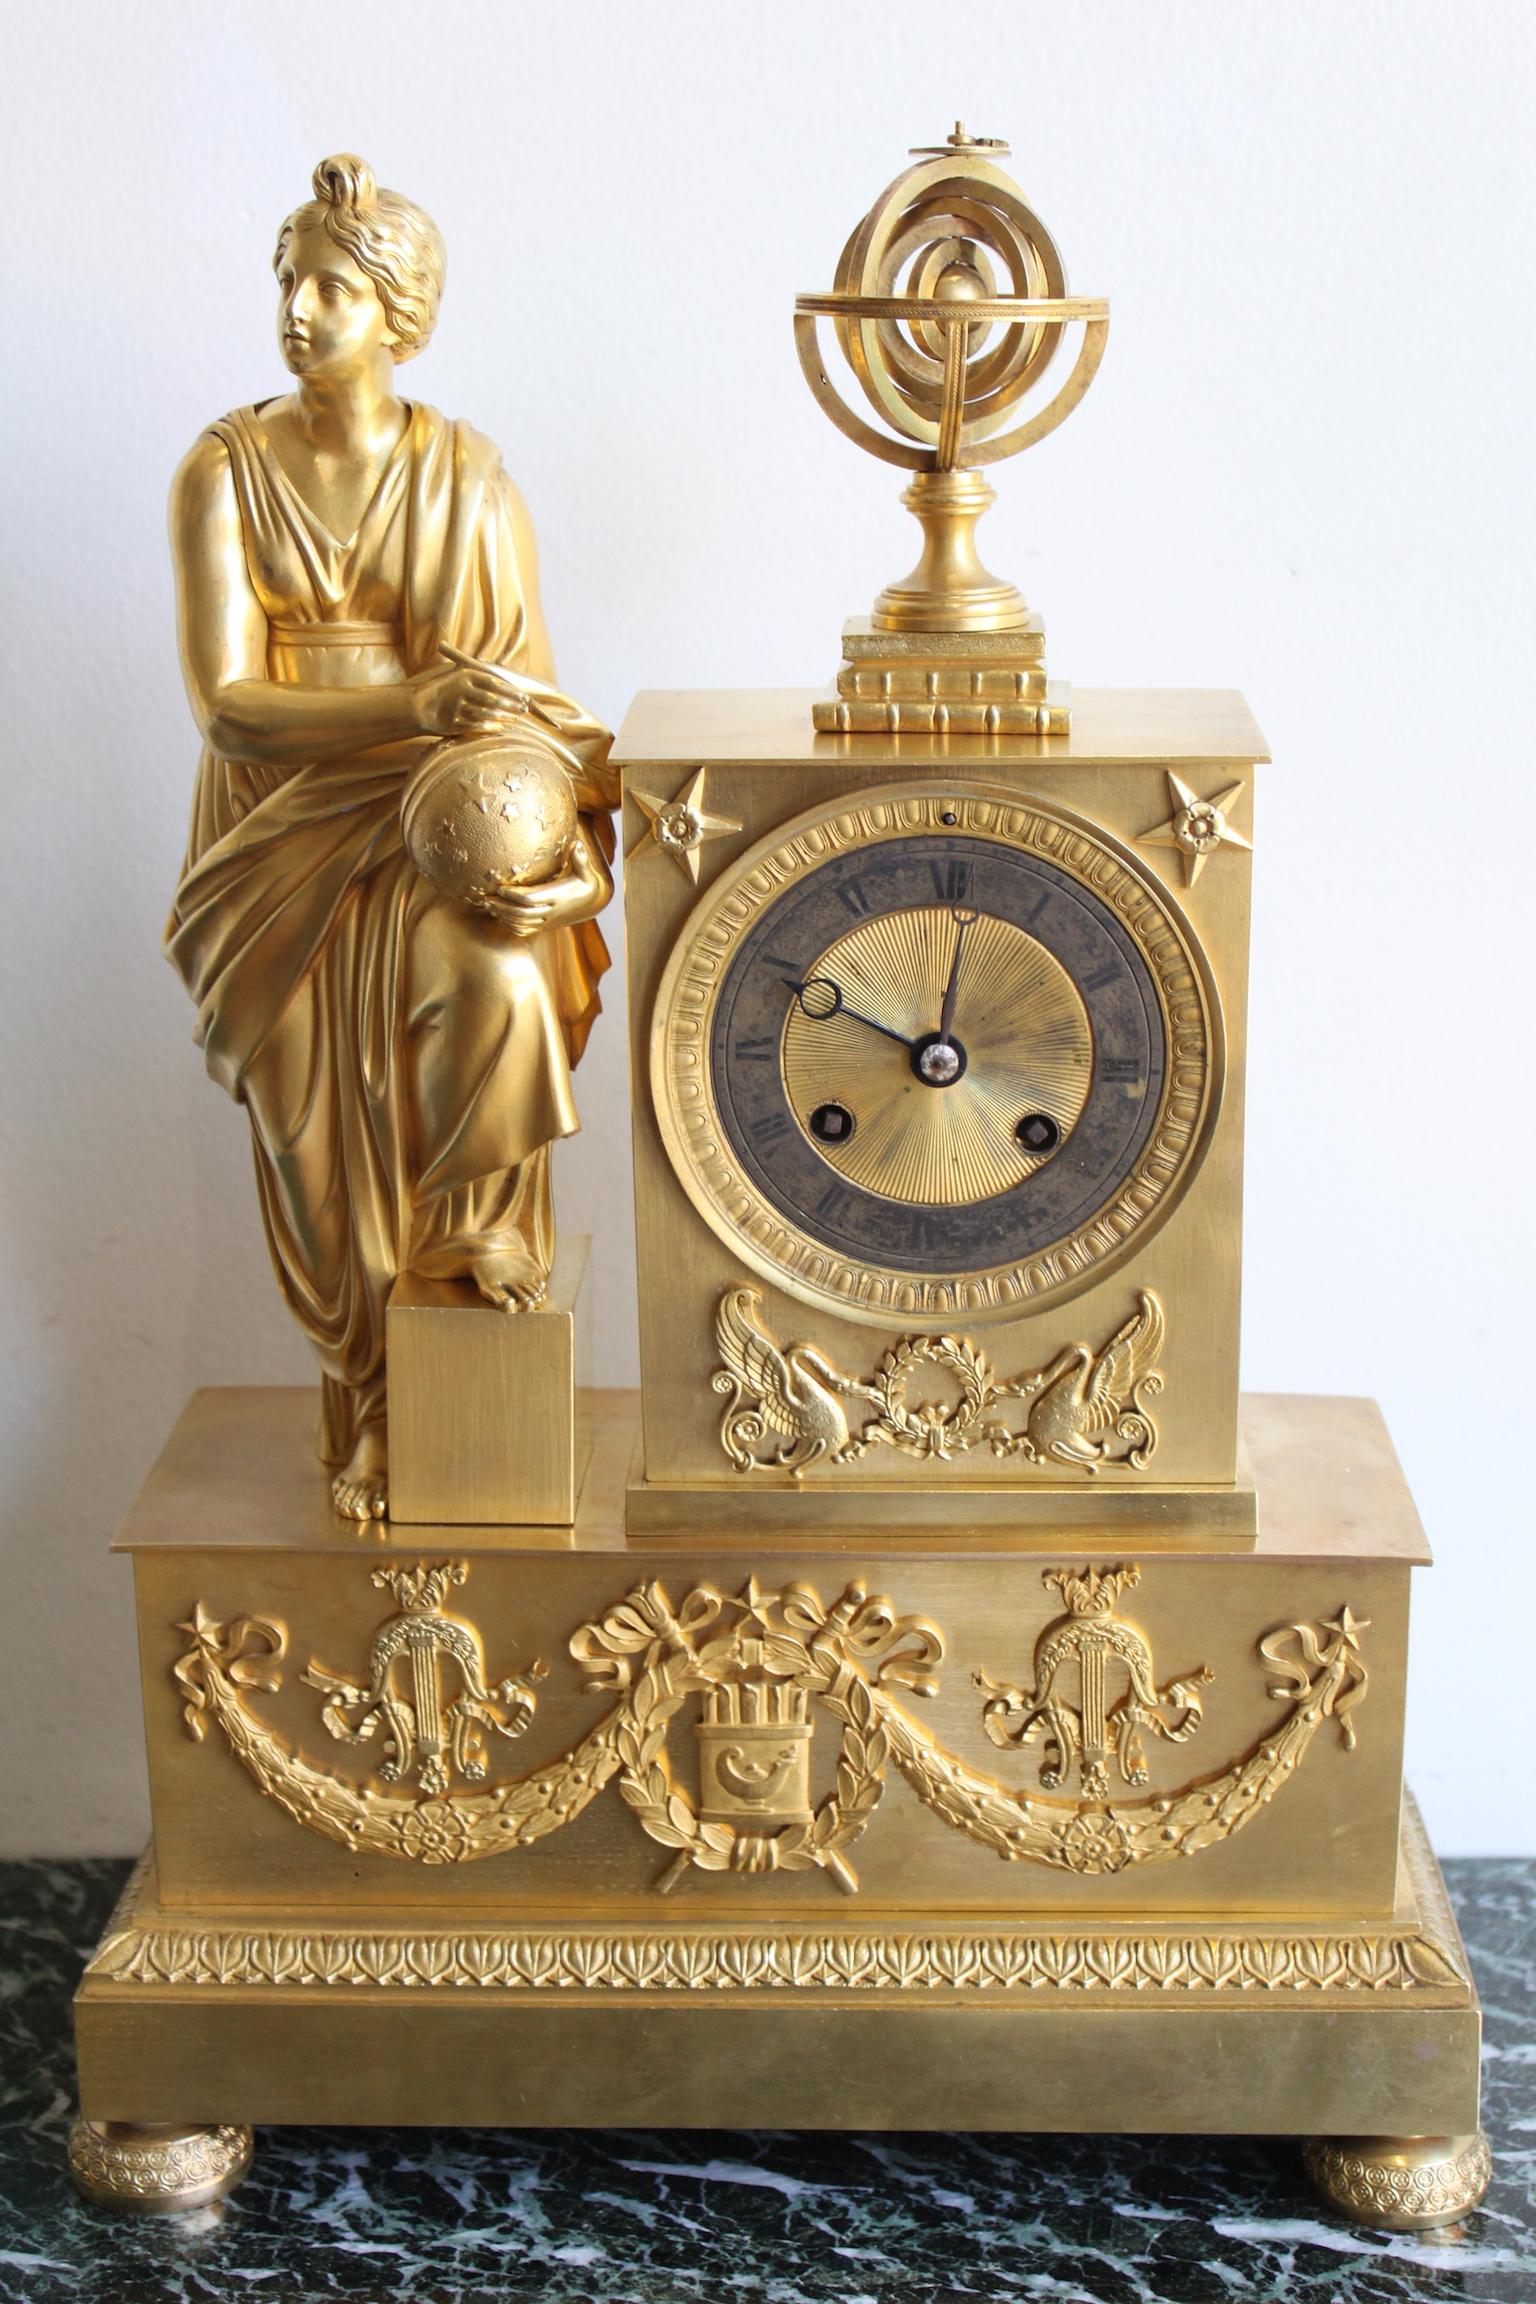 Napoleon 3 gilt bronze clock representing an allegory of Astronomy.
Good condition.
Dimensions: Height 38cm, width 26cm, depth 10cm